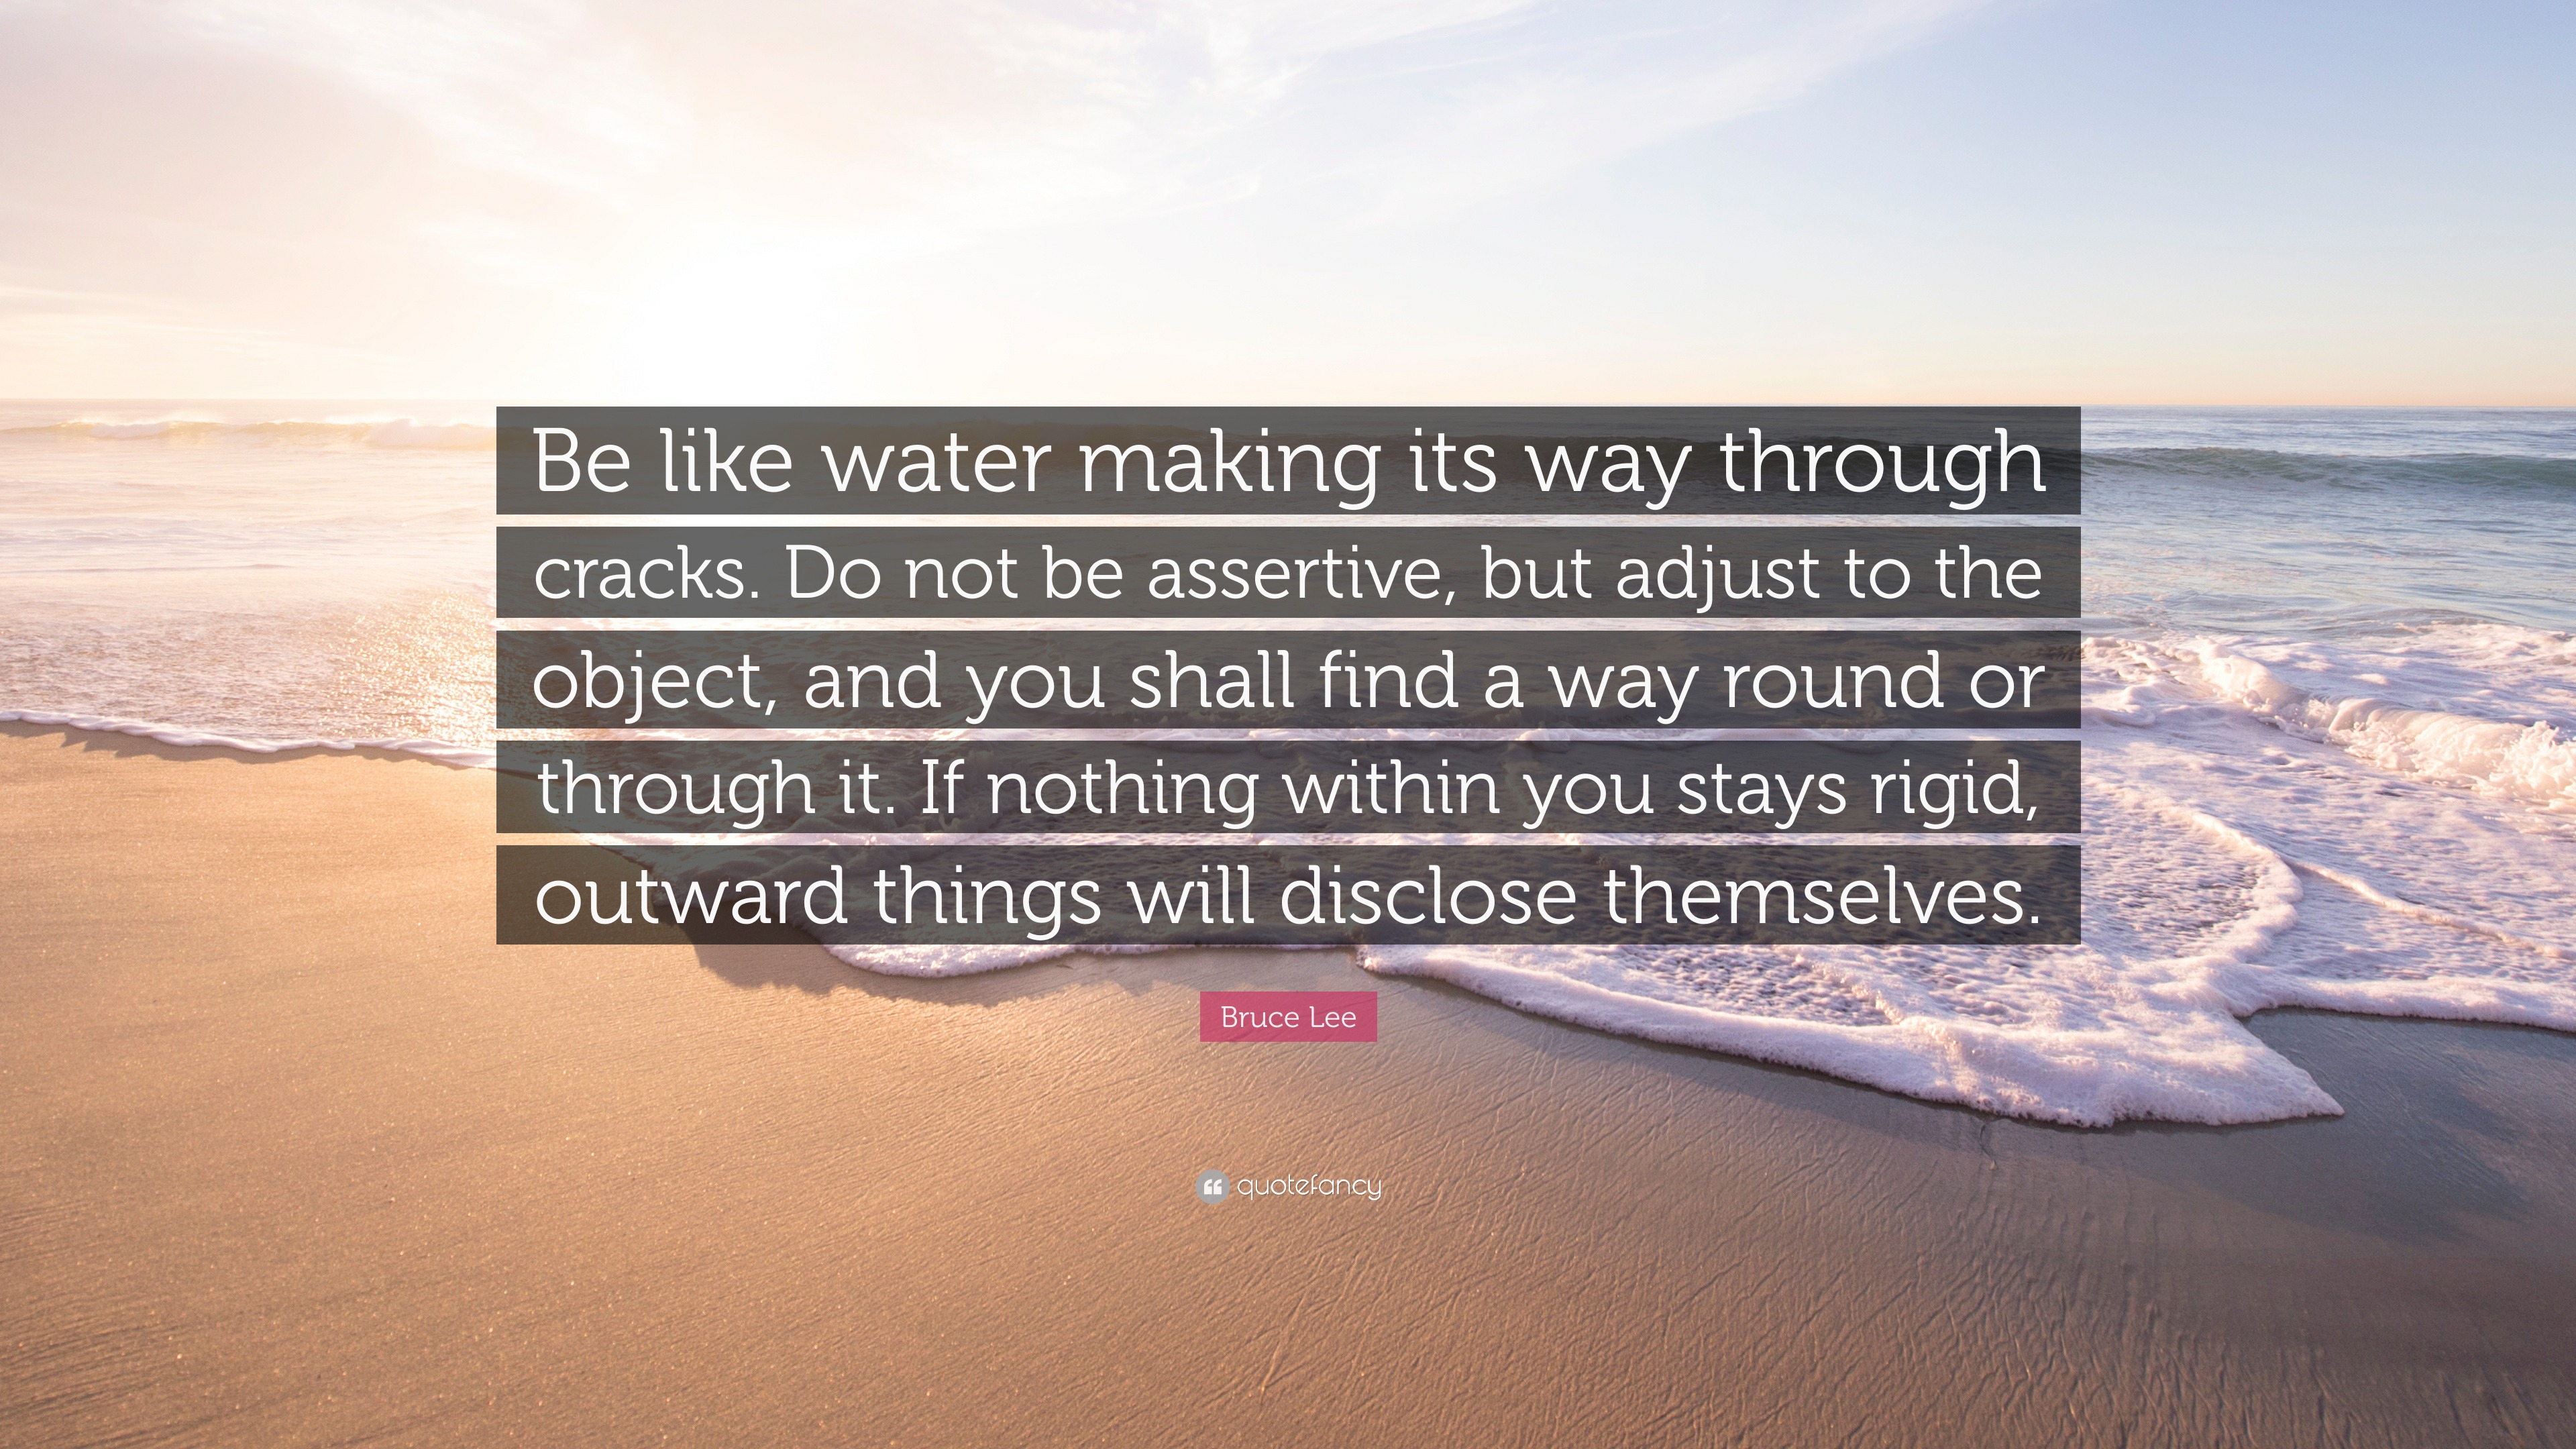 Bruce Lee Quote Be Like Water Making Its Way Through Cracks Do Not Be Assertive But Adjust To The Object And You Shall Find A Way Rou 12 Wallpapers Quotefancy